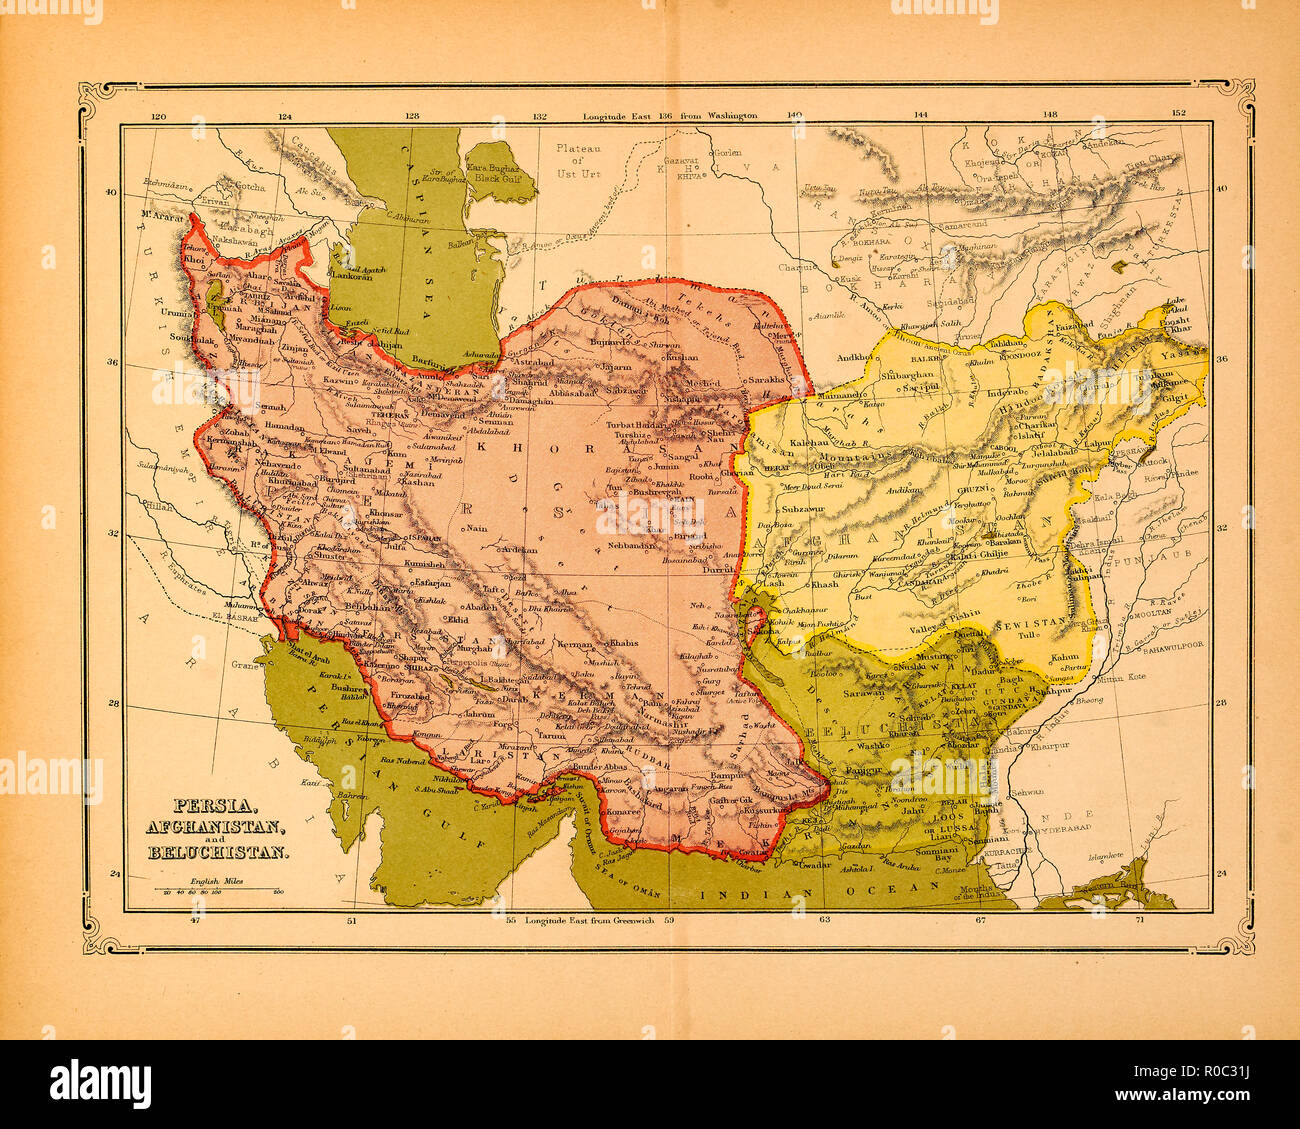 Persia, Afghanistan, Beluchistan, Map, early 1900's Stock Photo